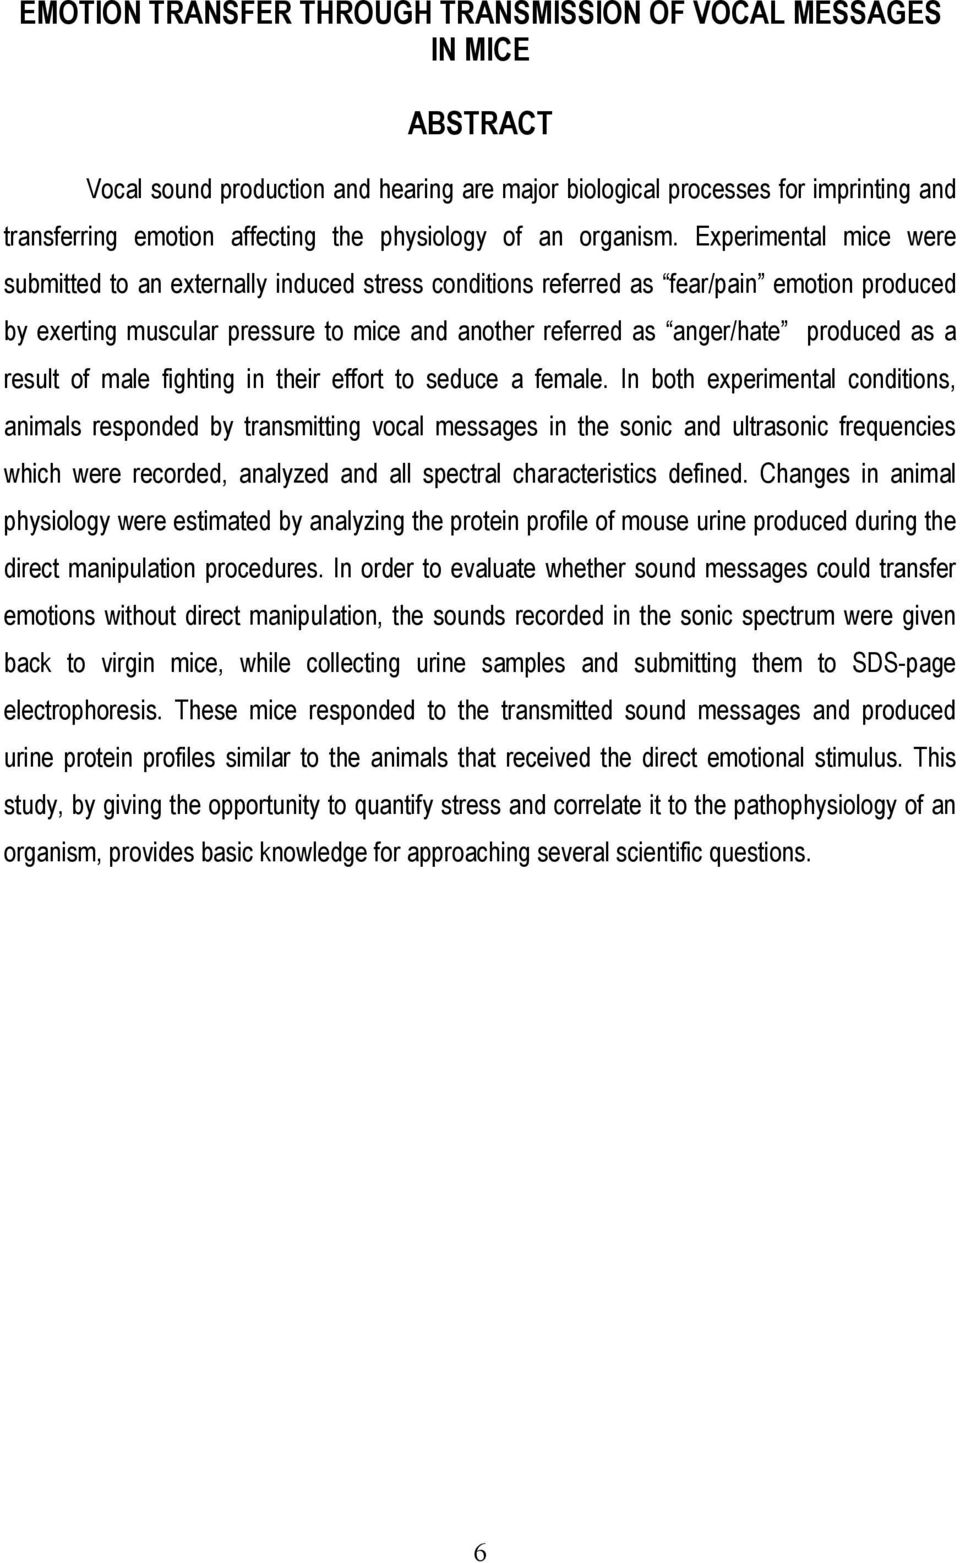 Experimental mice were submitted to an externally induced stress conditions referred as fear/pain emotion produced by exerting muscular pressure to mice and another referred as anger/hate produced as